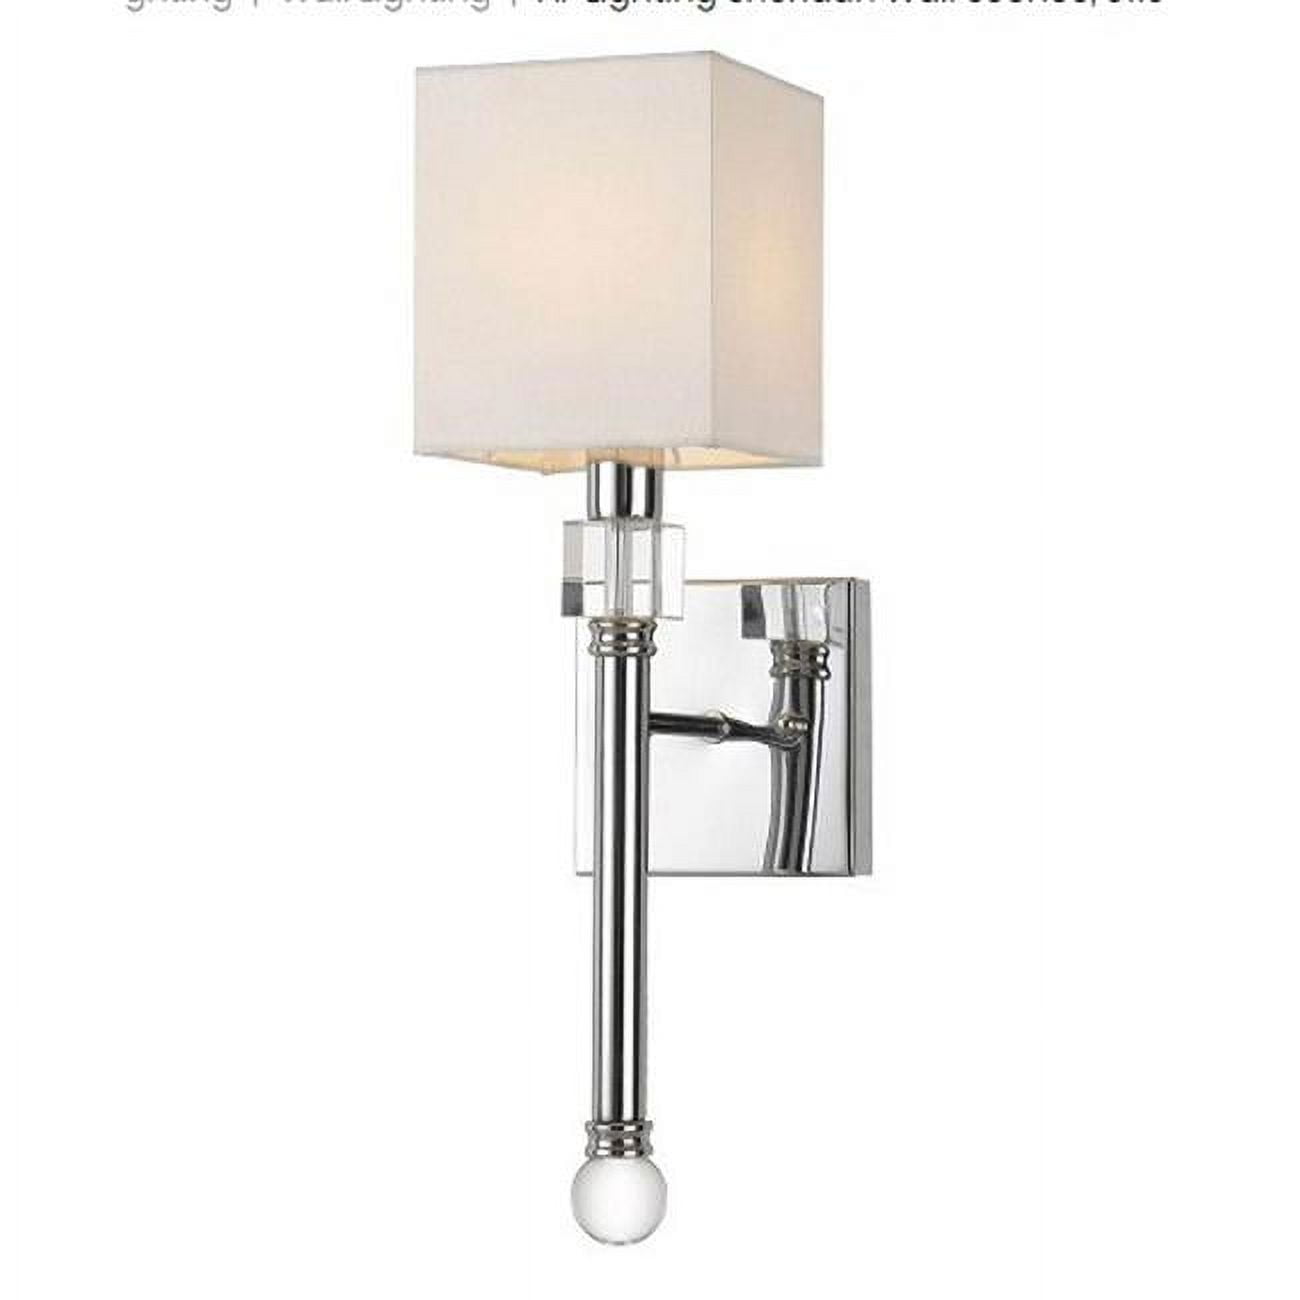 Picture of AF Lighting 9110-1W-2-KIT 60W Sheridan Wall Sconce, Modern Chrome - 2 Piece